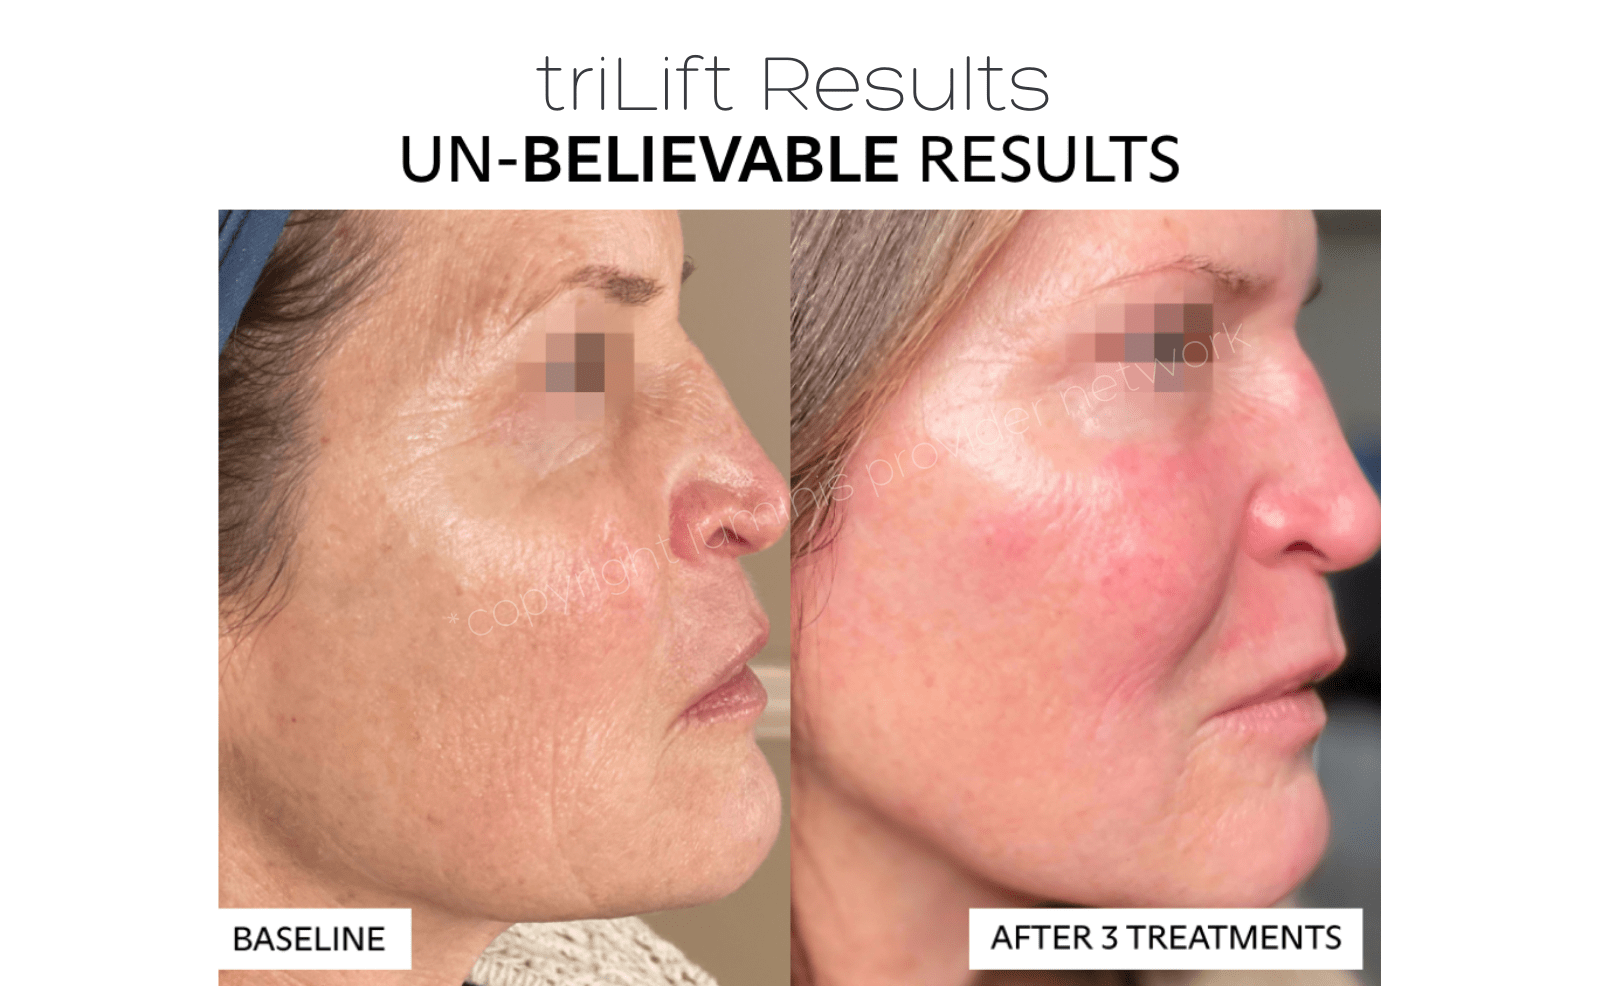 triLift results before and after 3 treatments